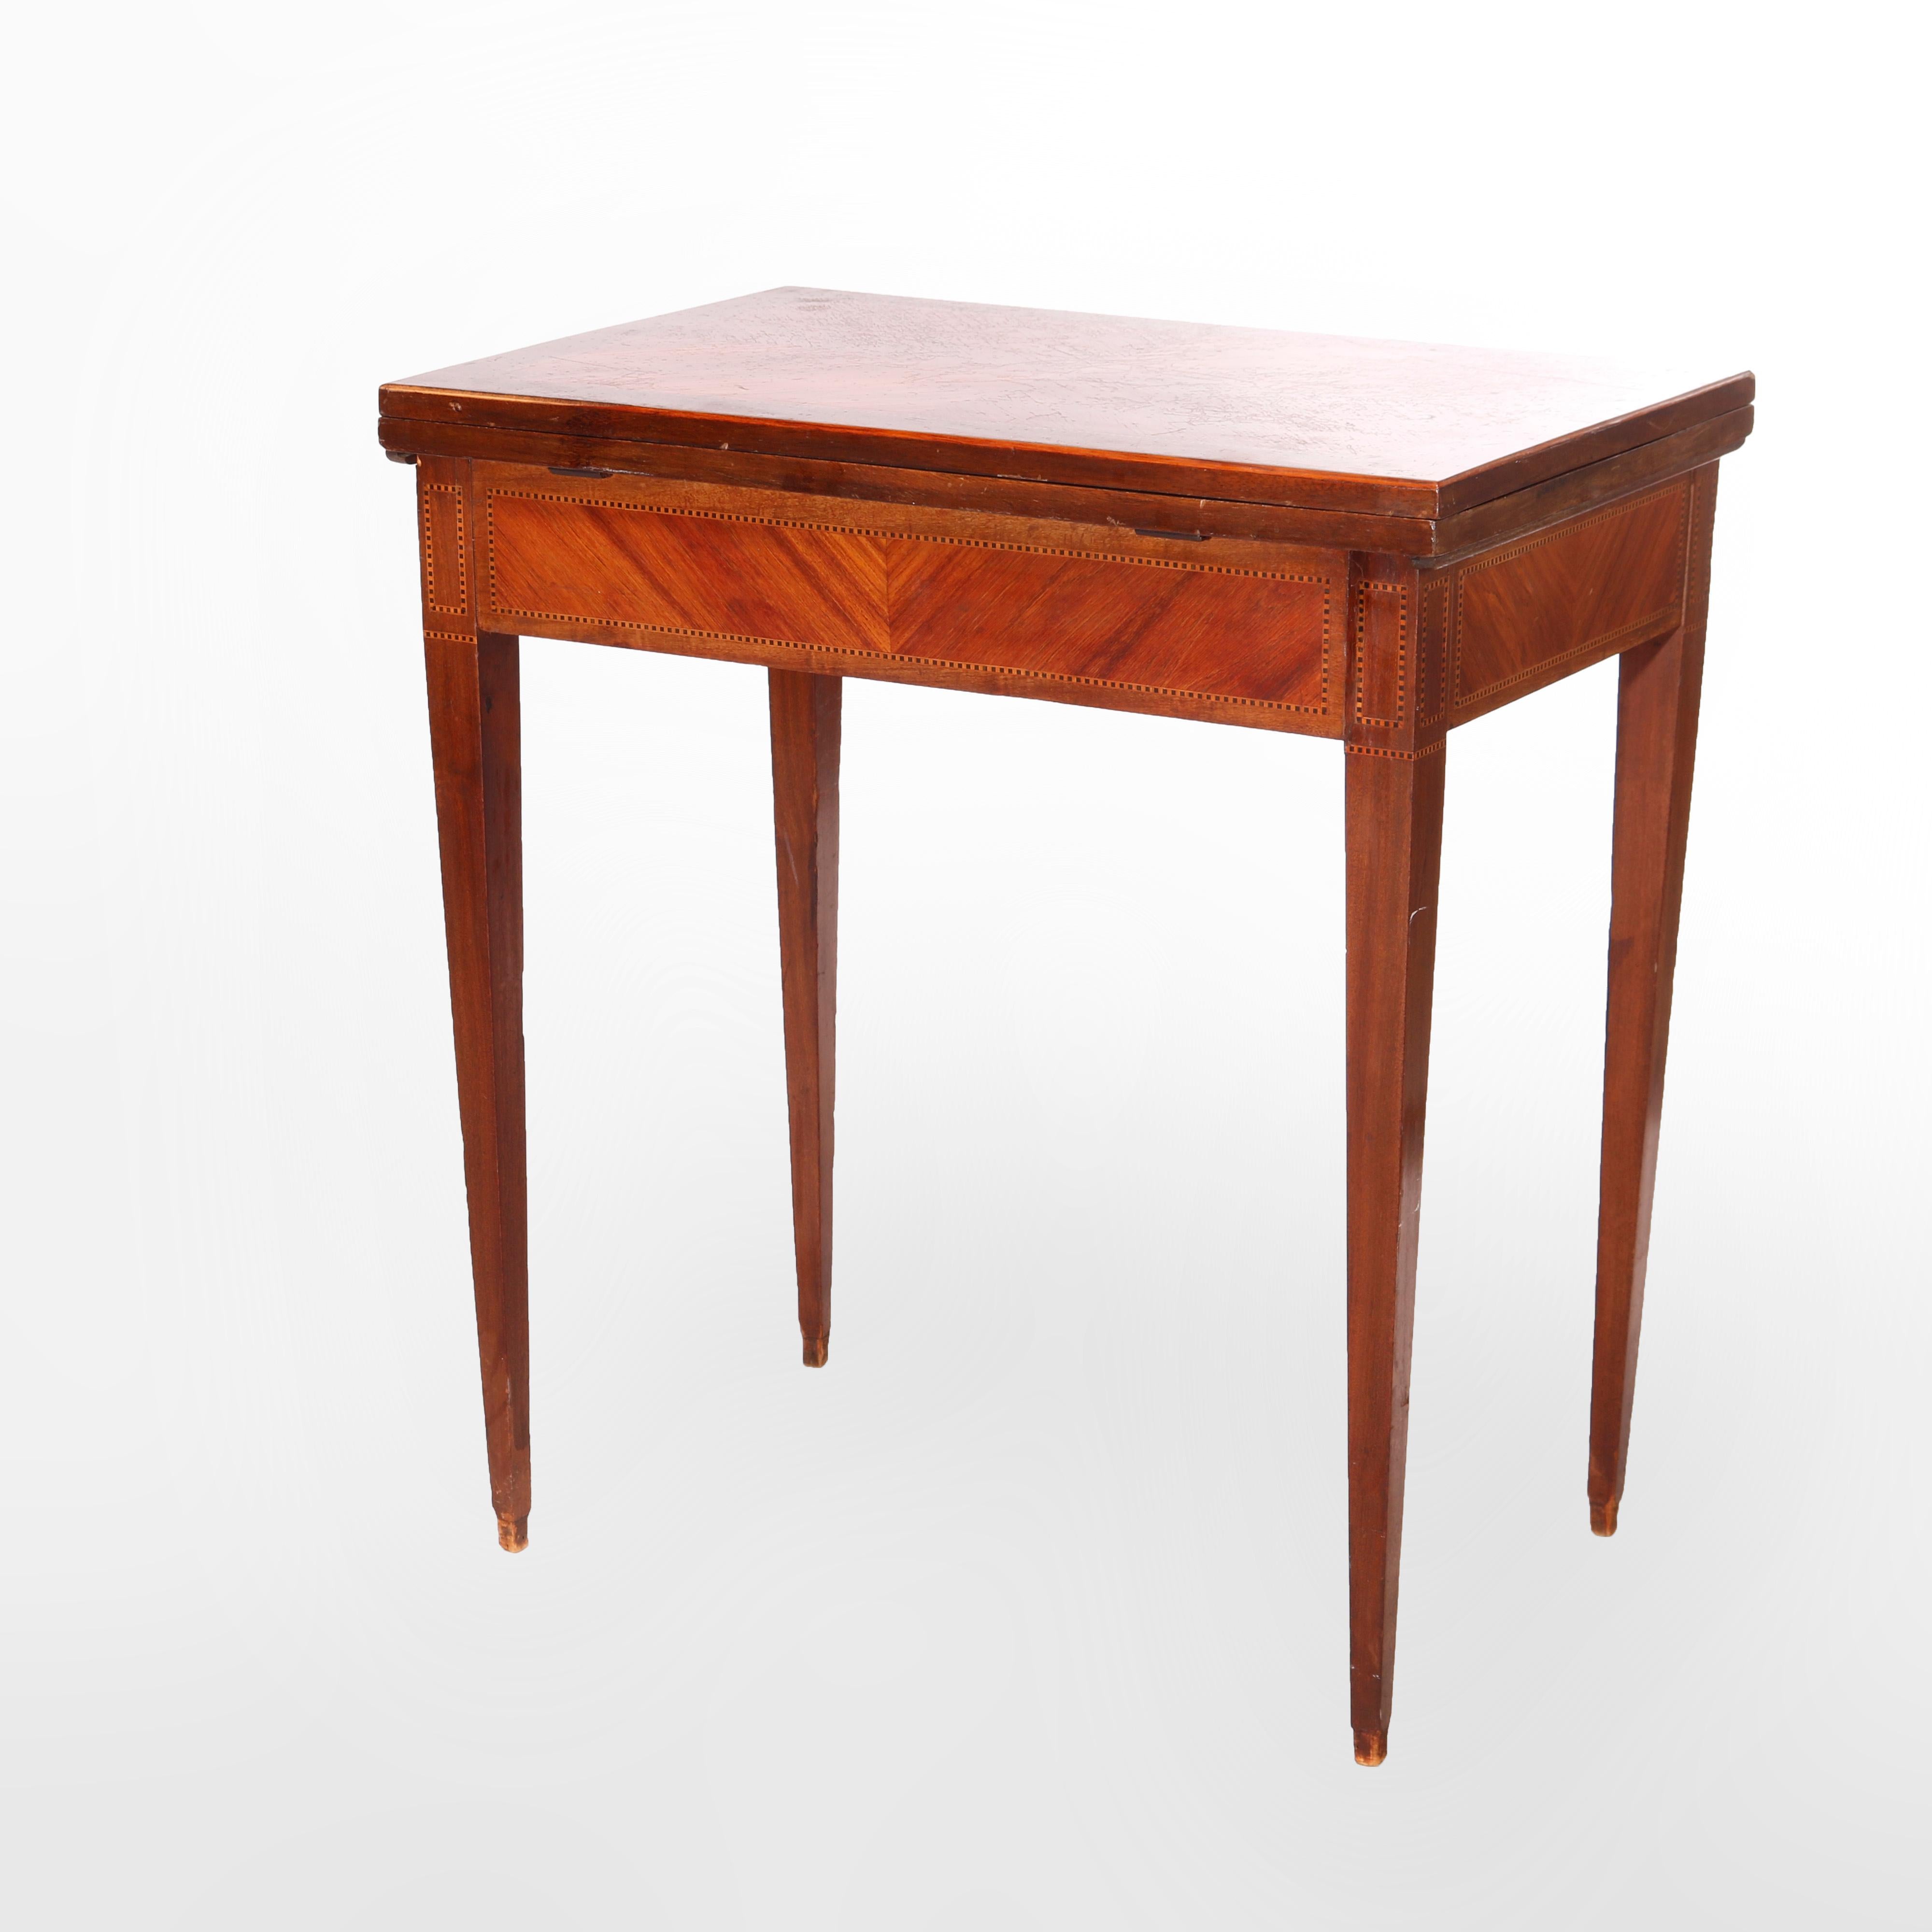 An antique French Louis XV game table offers kingwood and rosewood construction with single drawer and flip-top opening to felt lined gaming surface, bookmatched facing and ebonized inlaid banding throughout, raised on taper legs, 19th